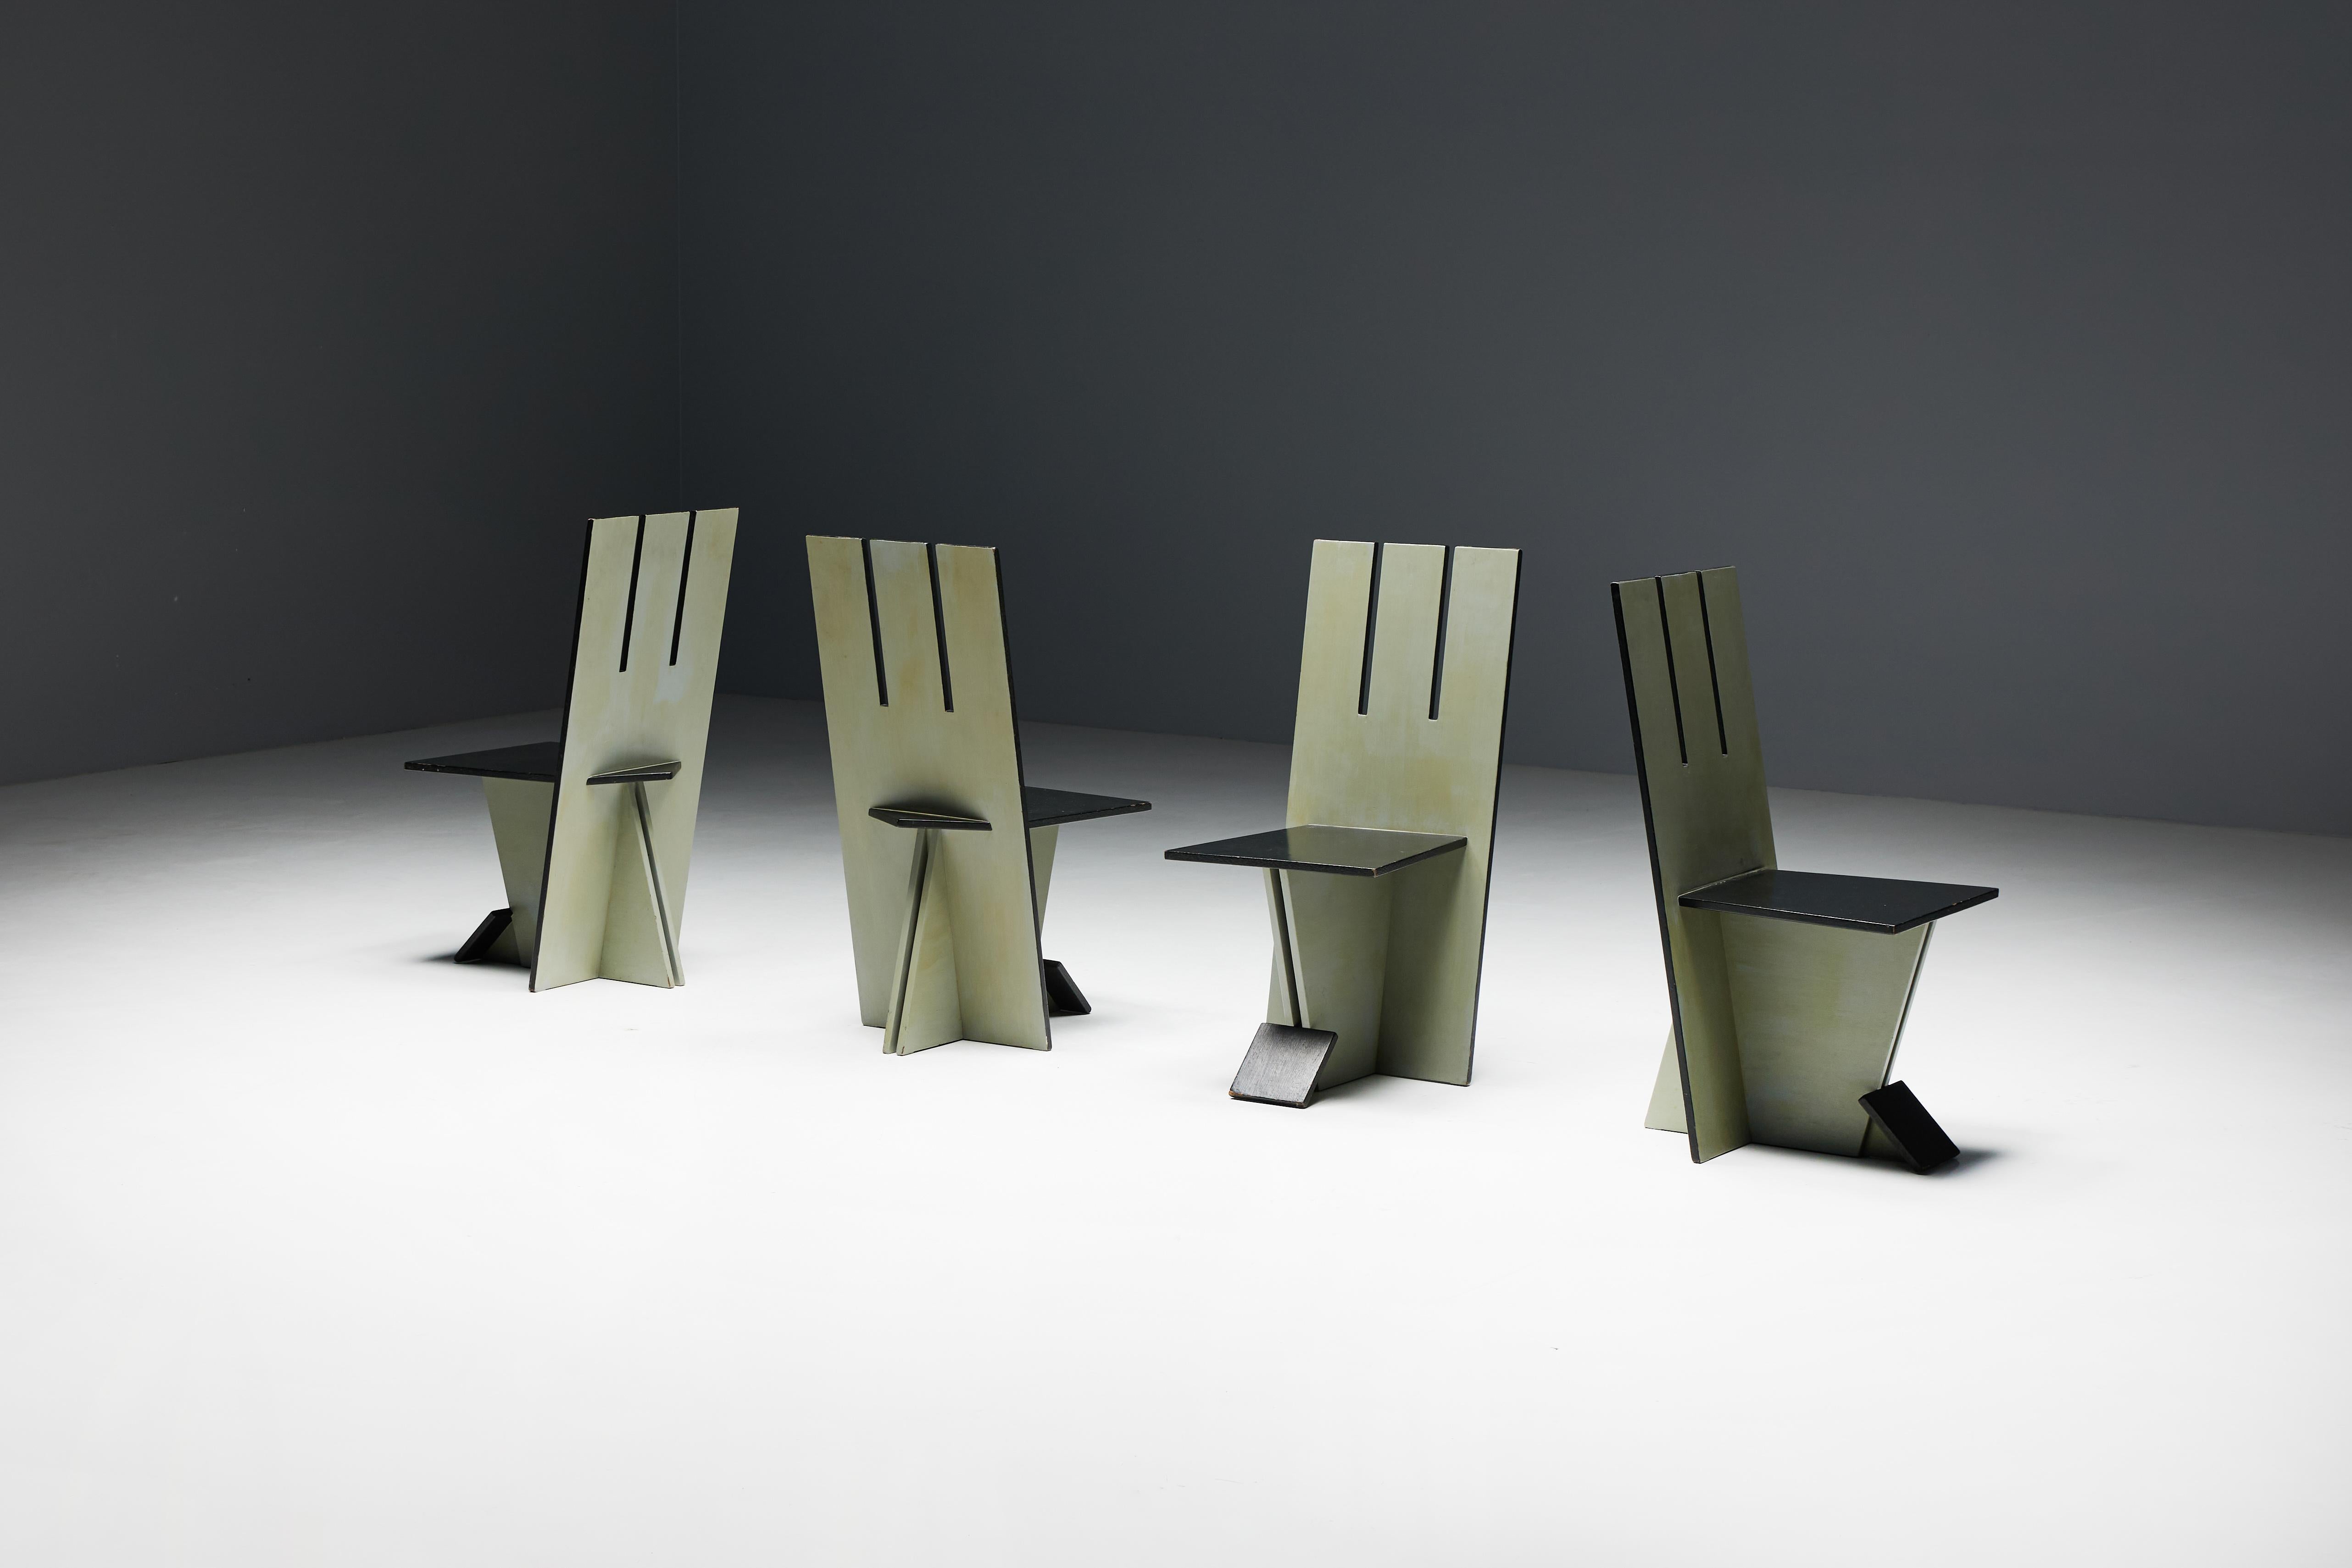 Set of 4 dining chairs, echoing the visionary spirit of the De Stijl movement of the 1930s and inspired by the pioneering works of Vilmos Huszar and Piet Zwart. Constructed from painted wood, these chairs exhibit meticulous attention to detail,